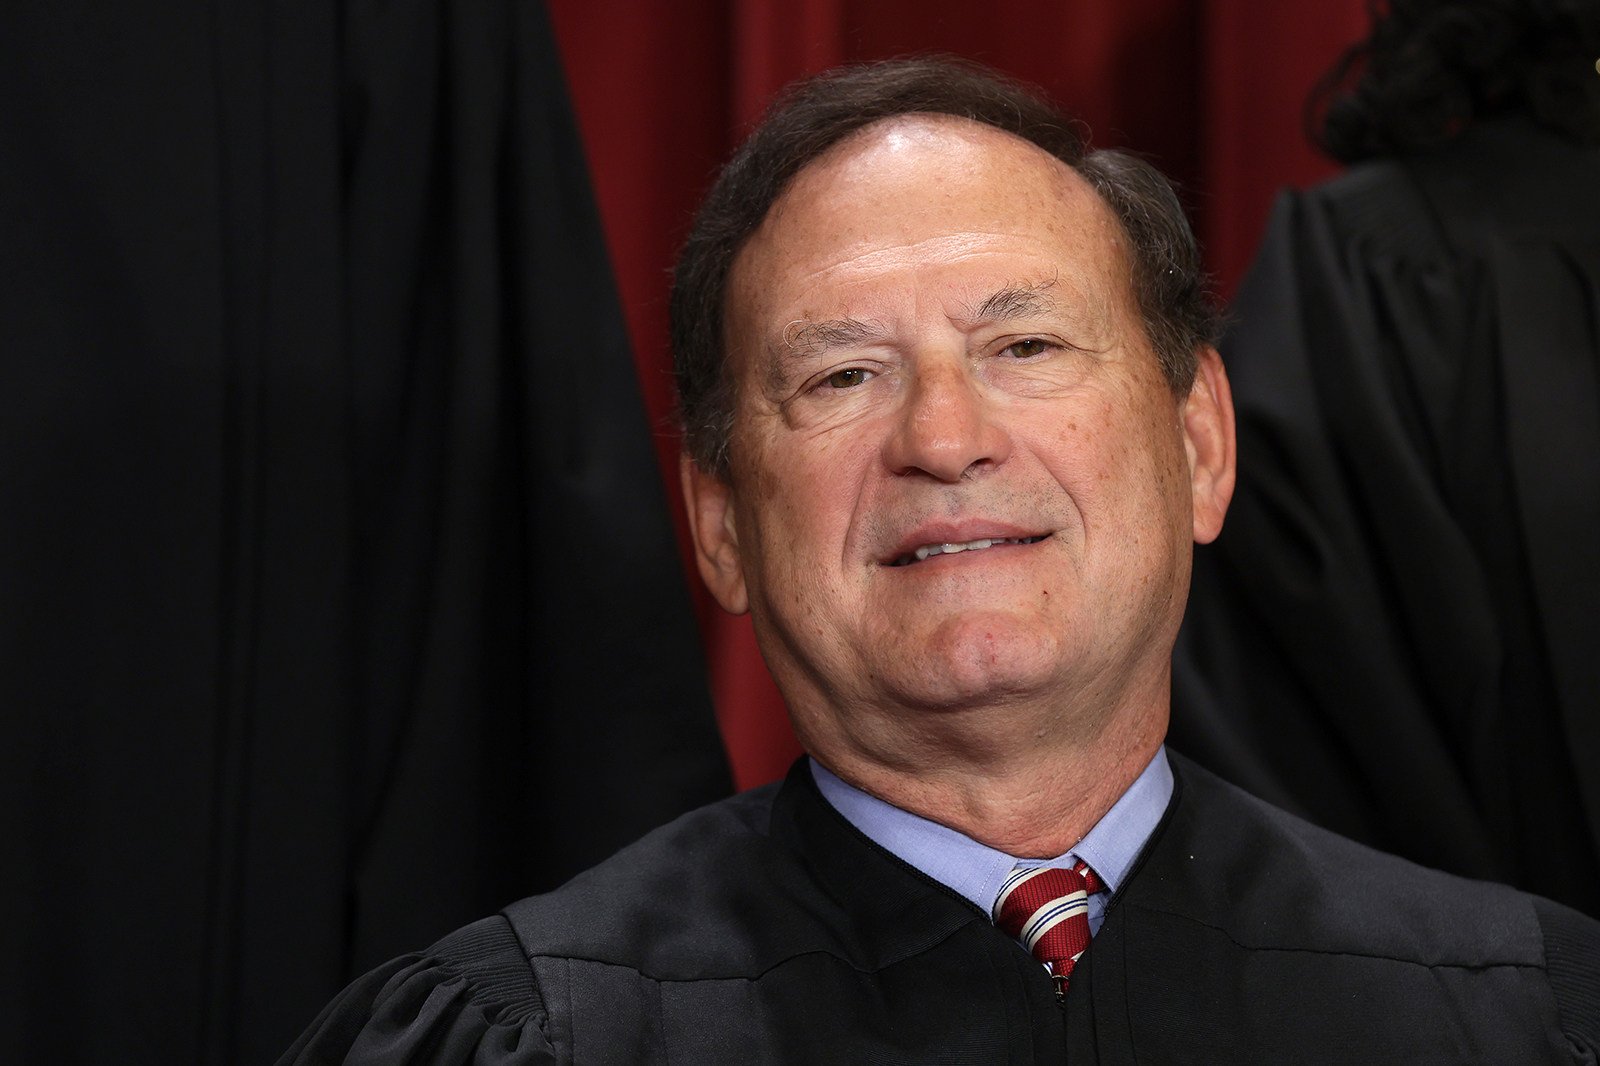 US Supreme Court Associate Justice Samuel Alito poses for an official portrait in Washington in October 2022. Photo: TNS